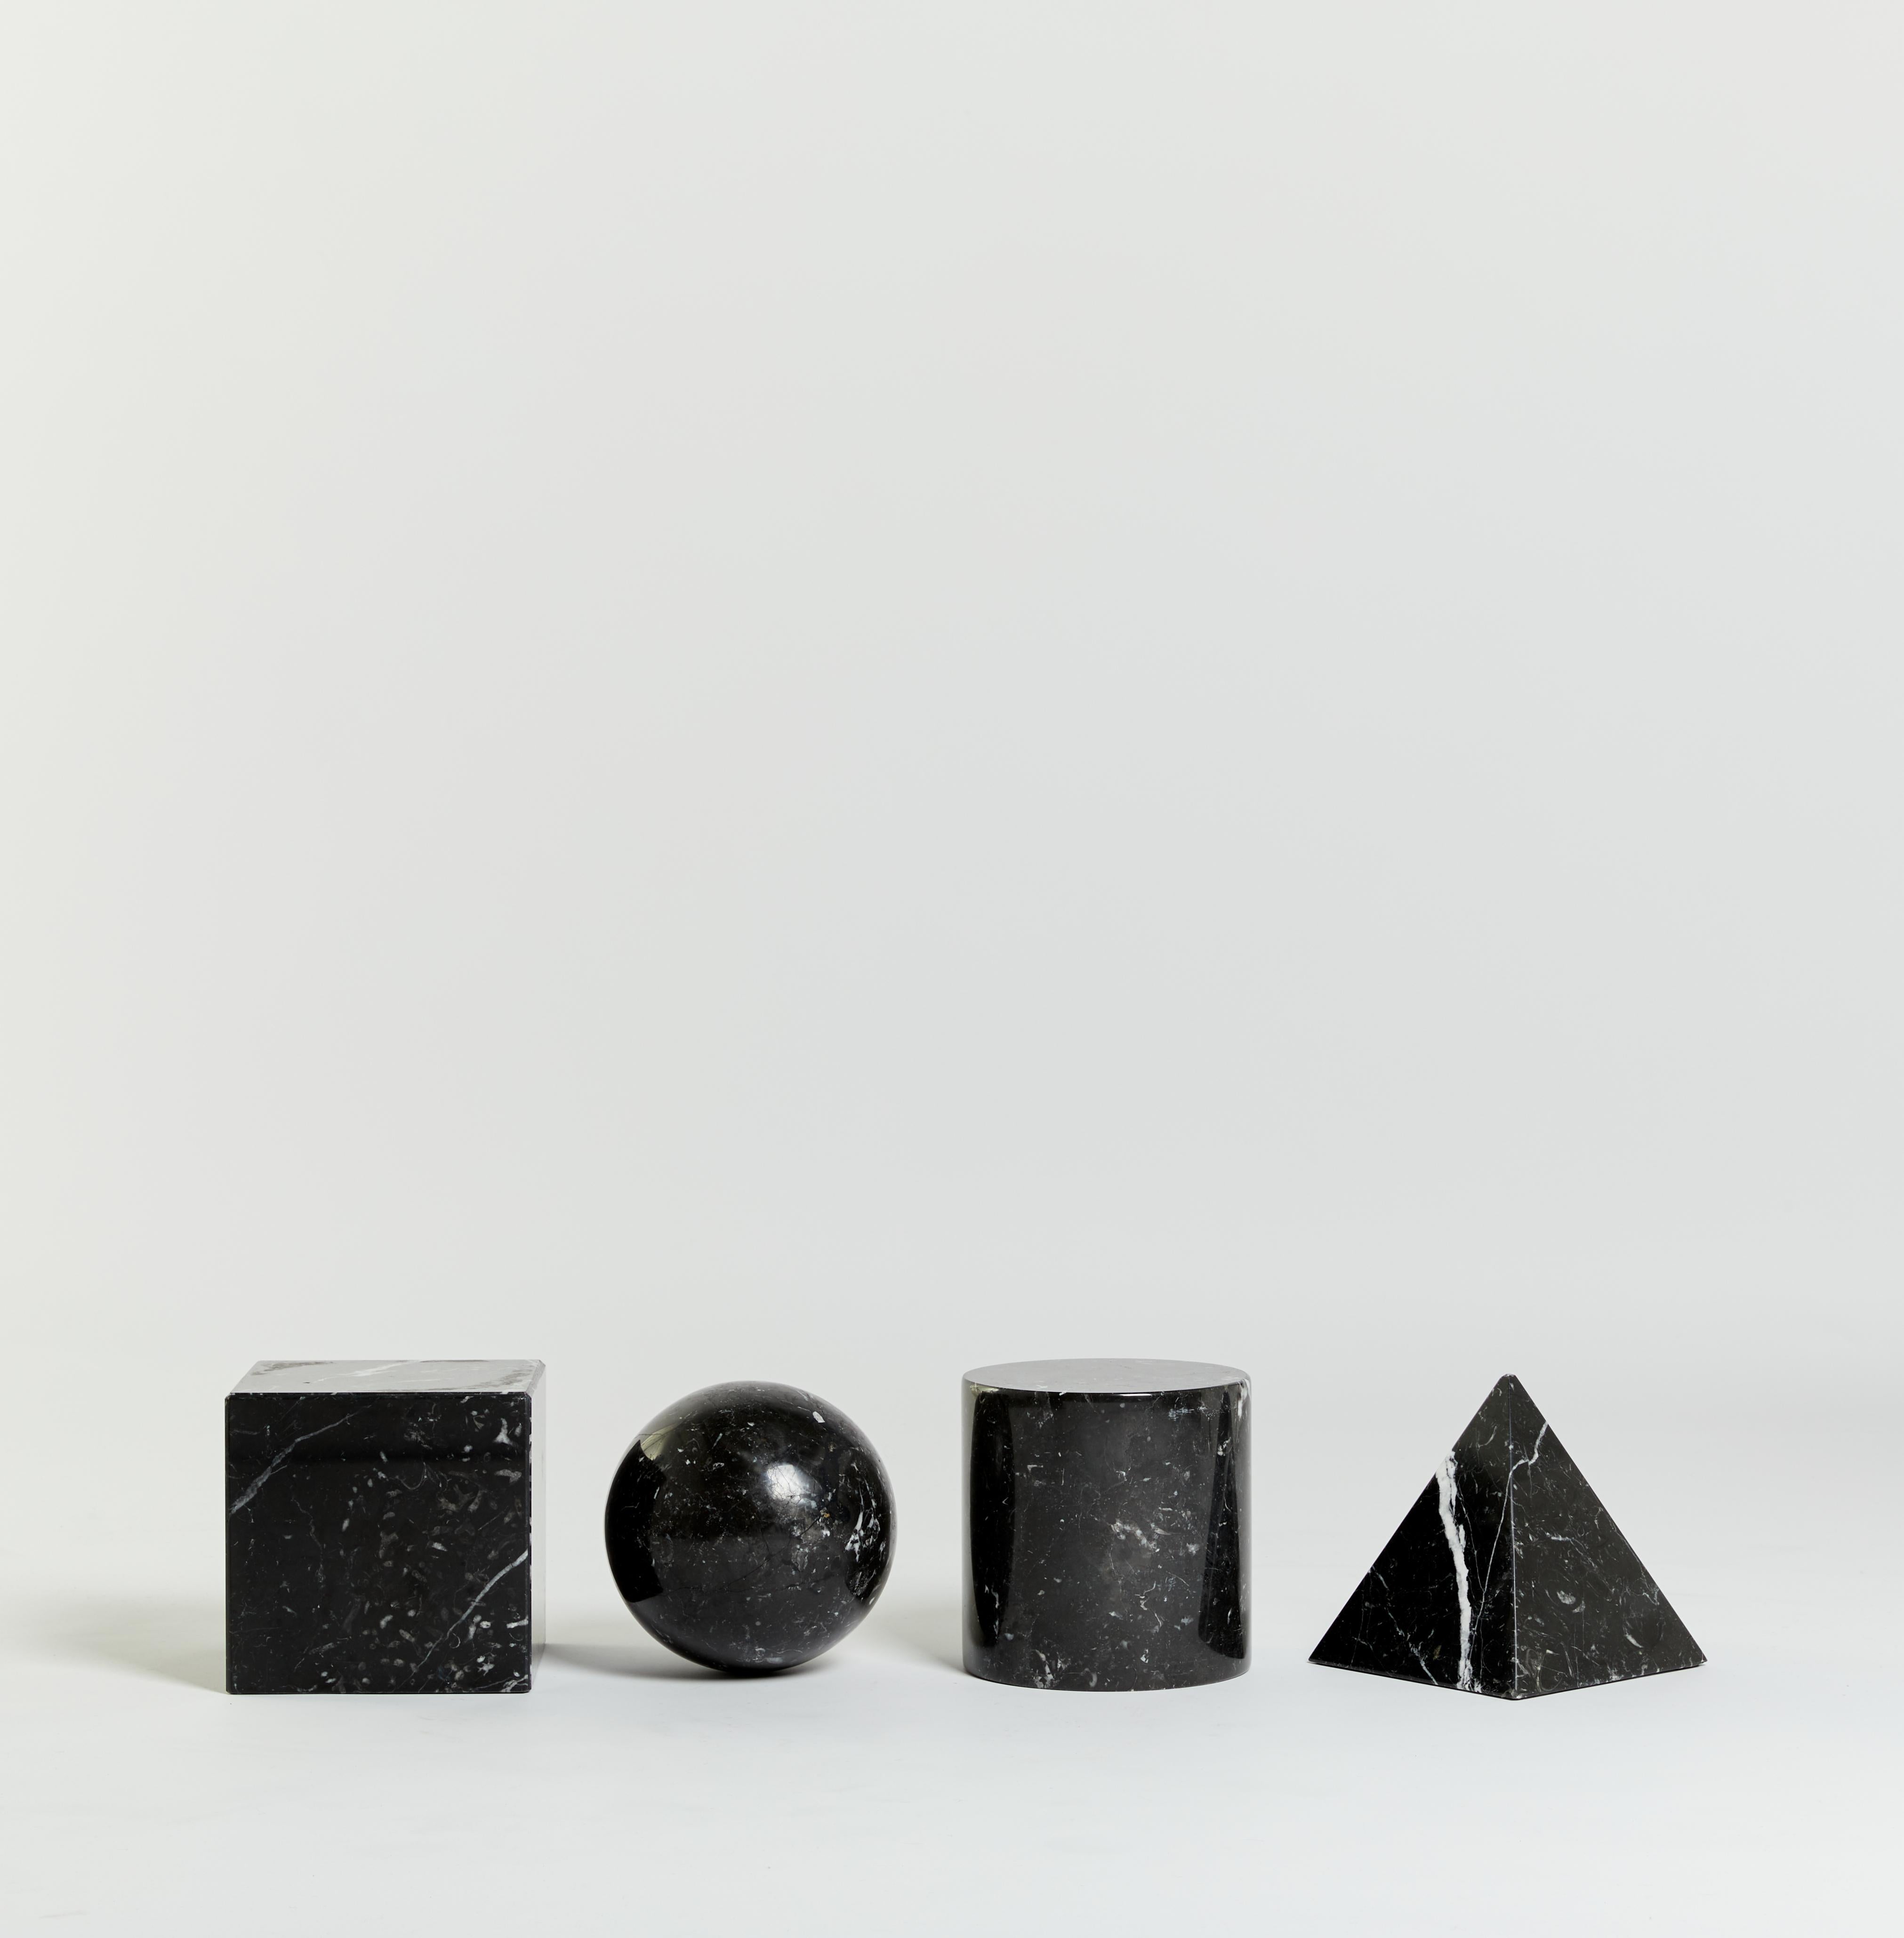 'Metafora' table by Lella and Massimo Vignelli.

Made in Italy in the late 1970s and inspired by the four forms of Euclidean geometry: the cube, the pyramid, the cylinder and the sphere. These forms are made out of black marble and can be